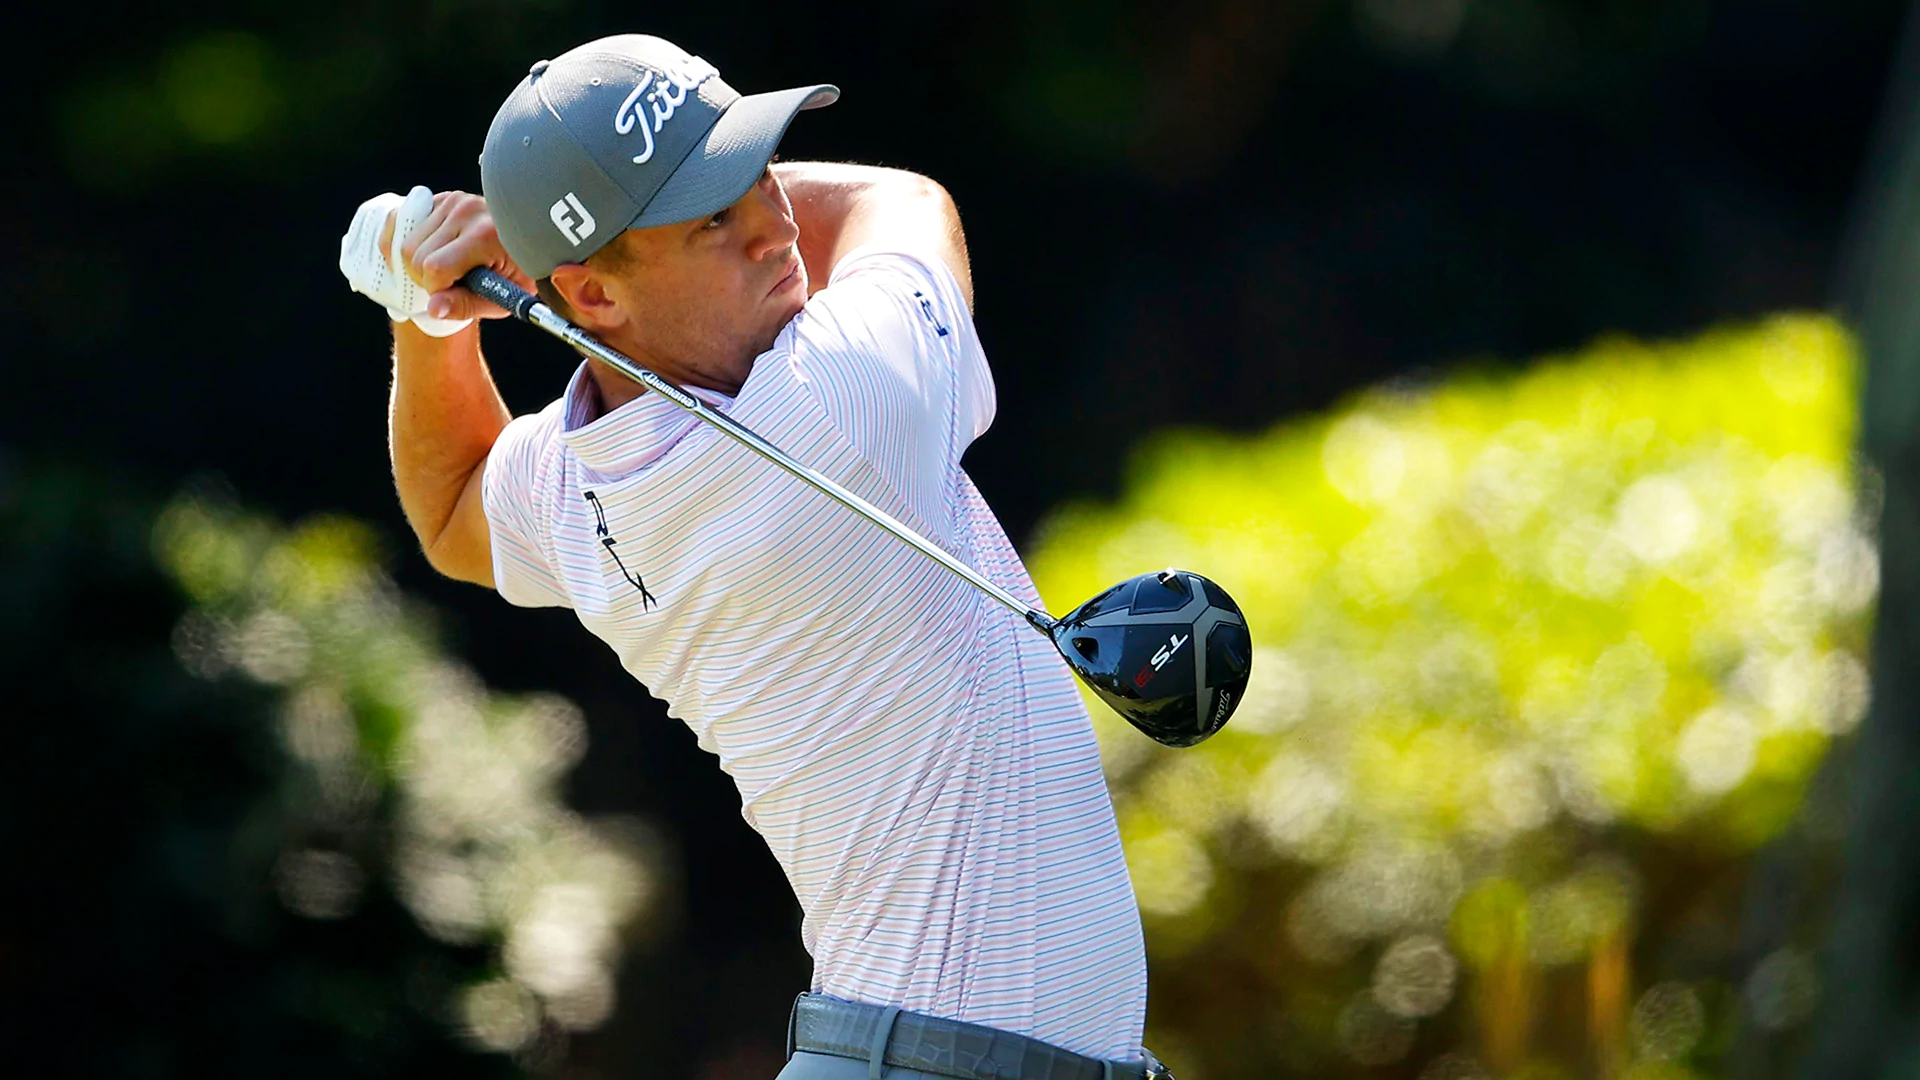 Justin Thomas says Hilton Head not serious about virus: ‘It’s an absolute zoo’